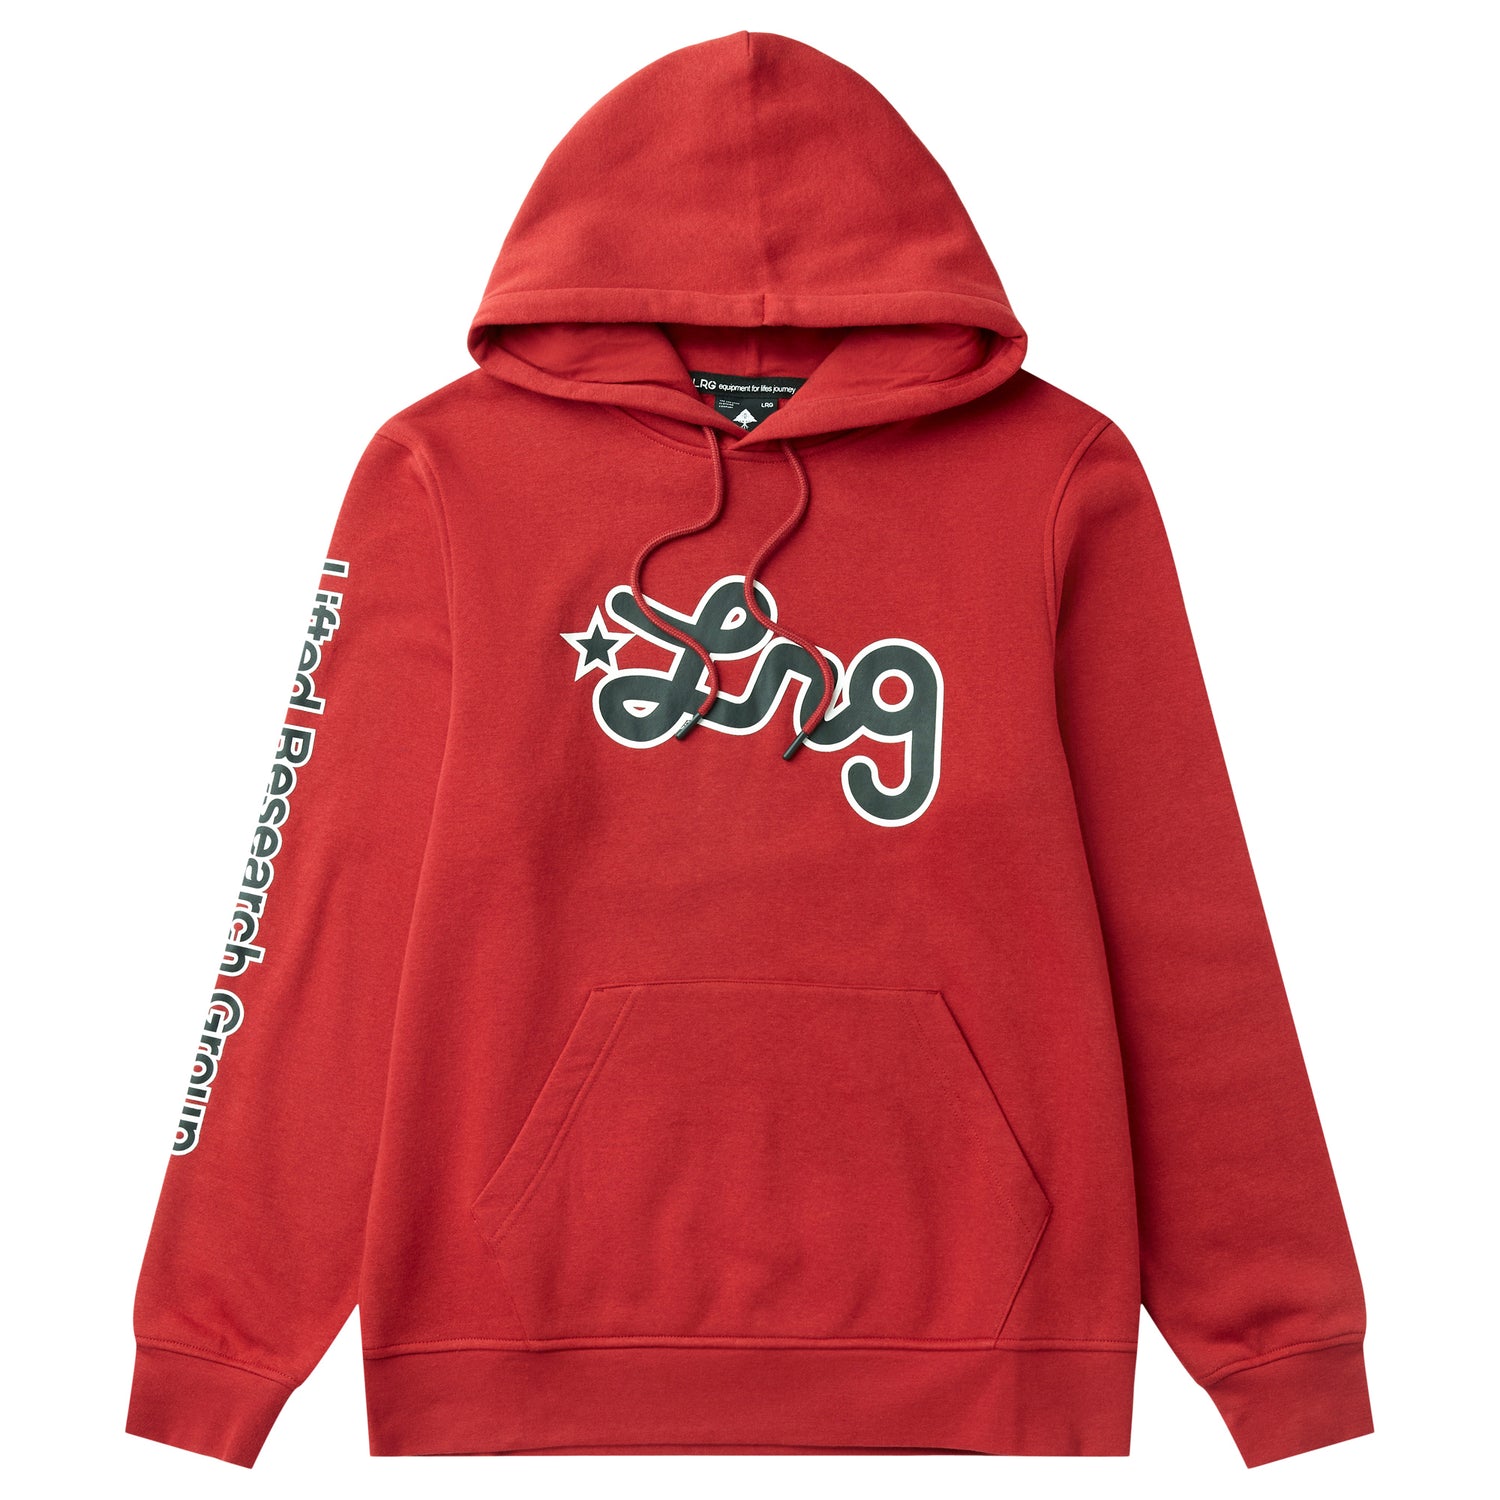 FRESHEST SCRIPT PULLOVER HOODIE - SPICED RED